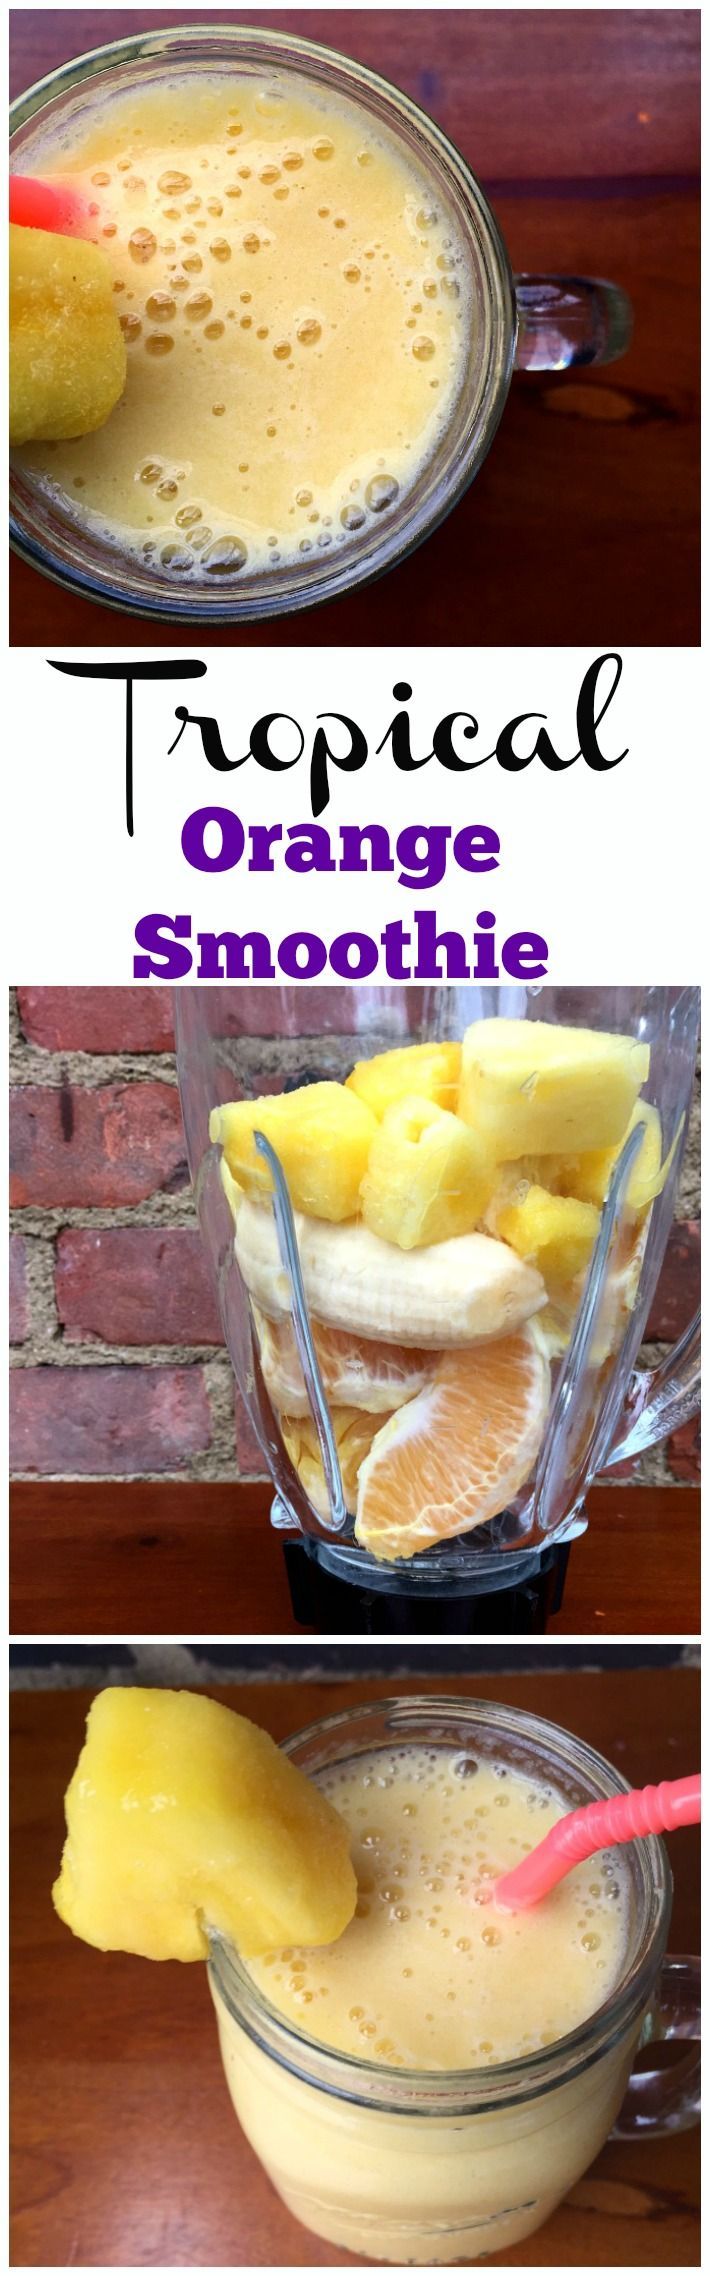 Tropical Orange Smoothie: With only four easy ingredients, this smoothie contains a boost of vitamins and is a light and